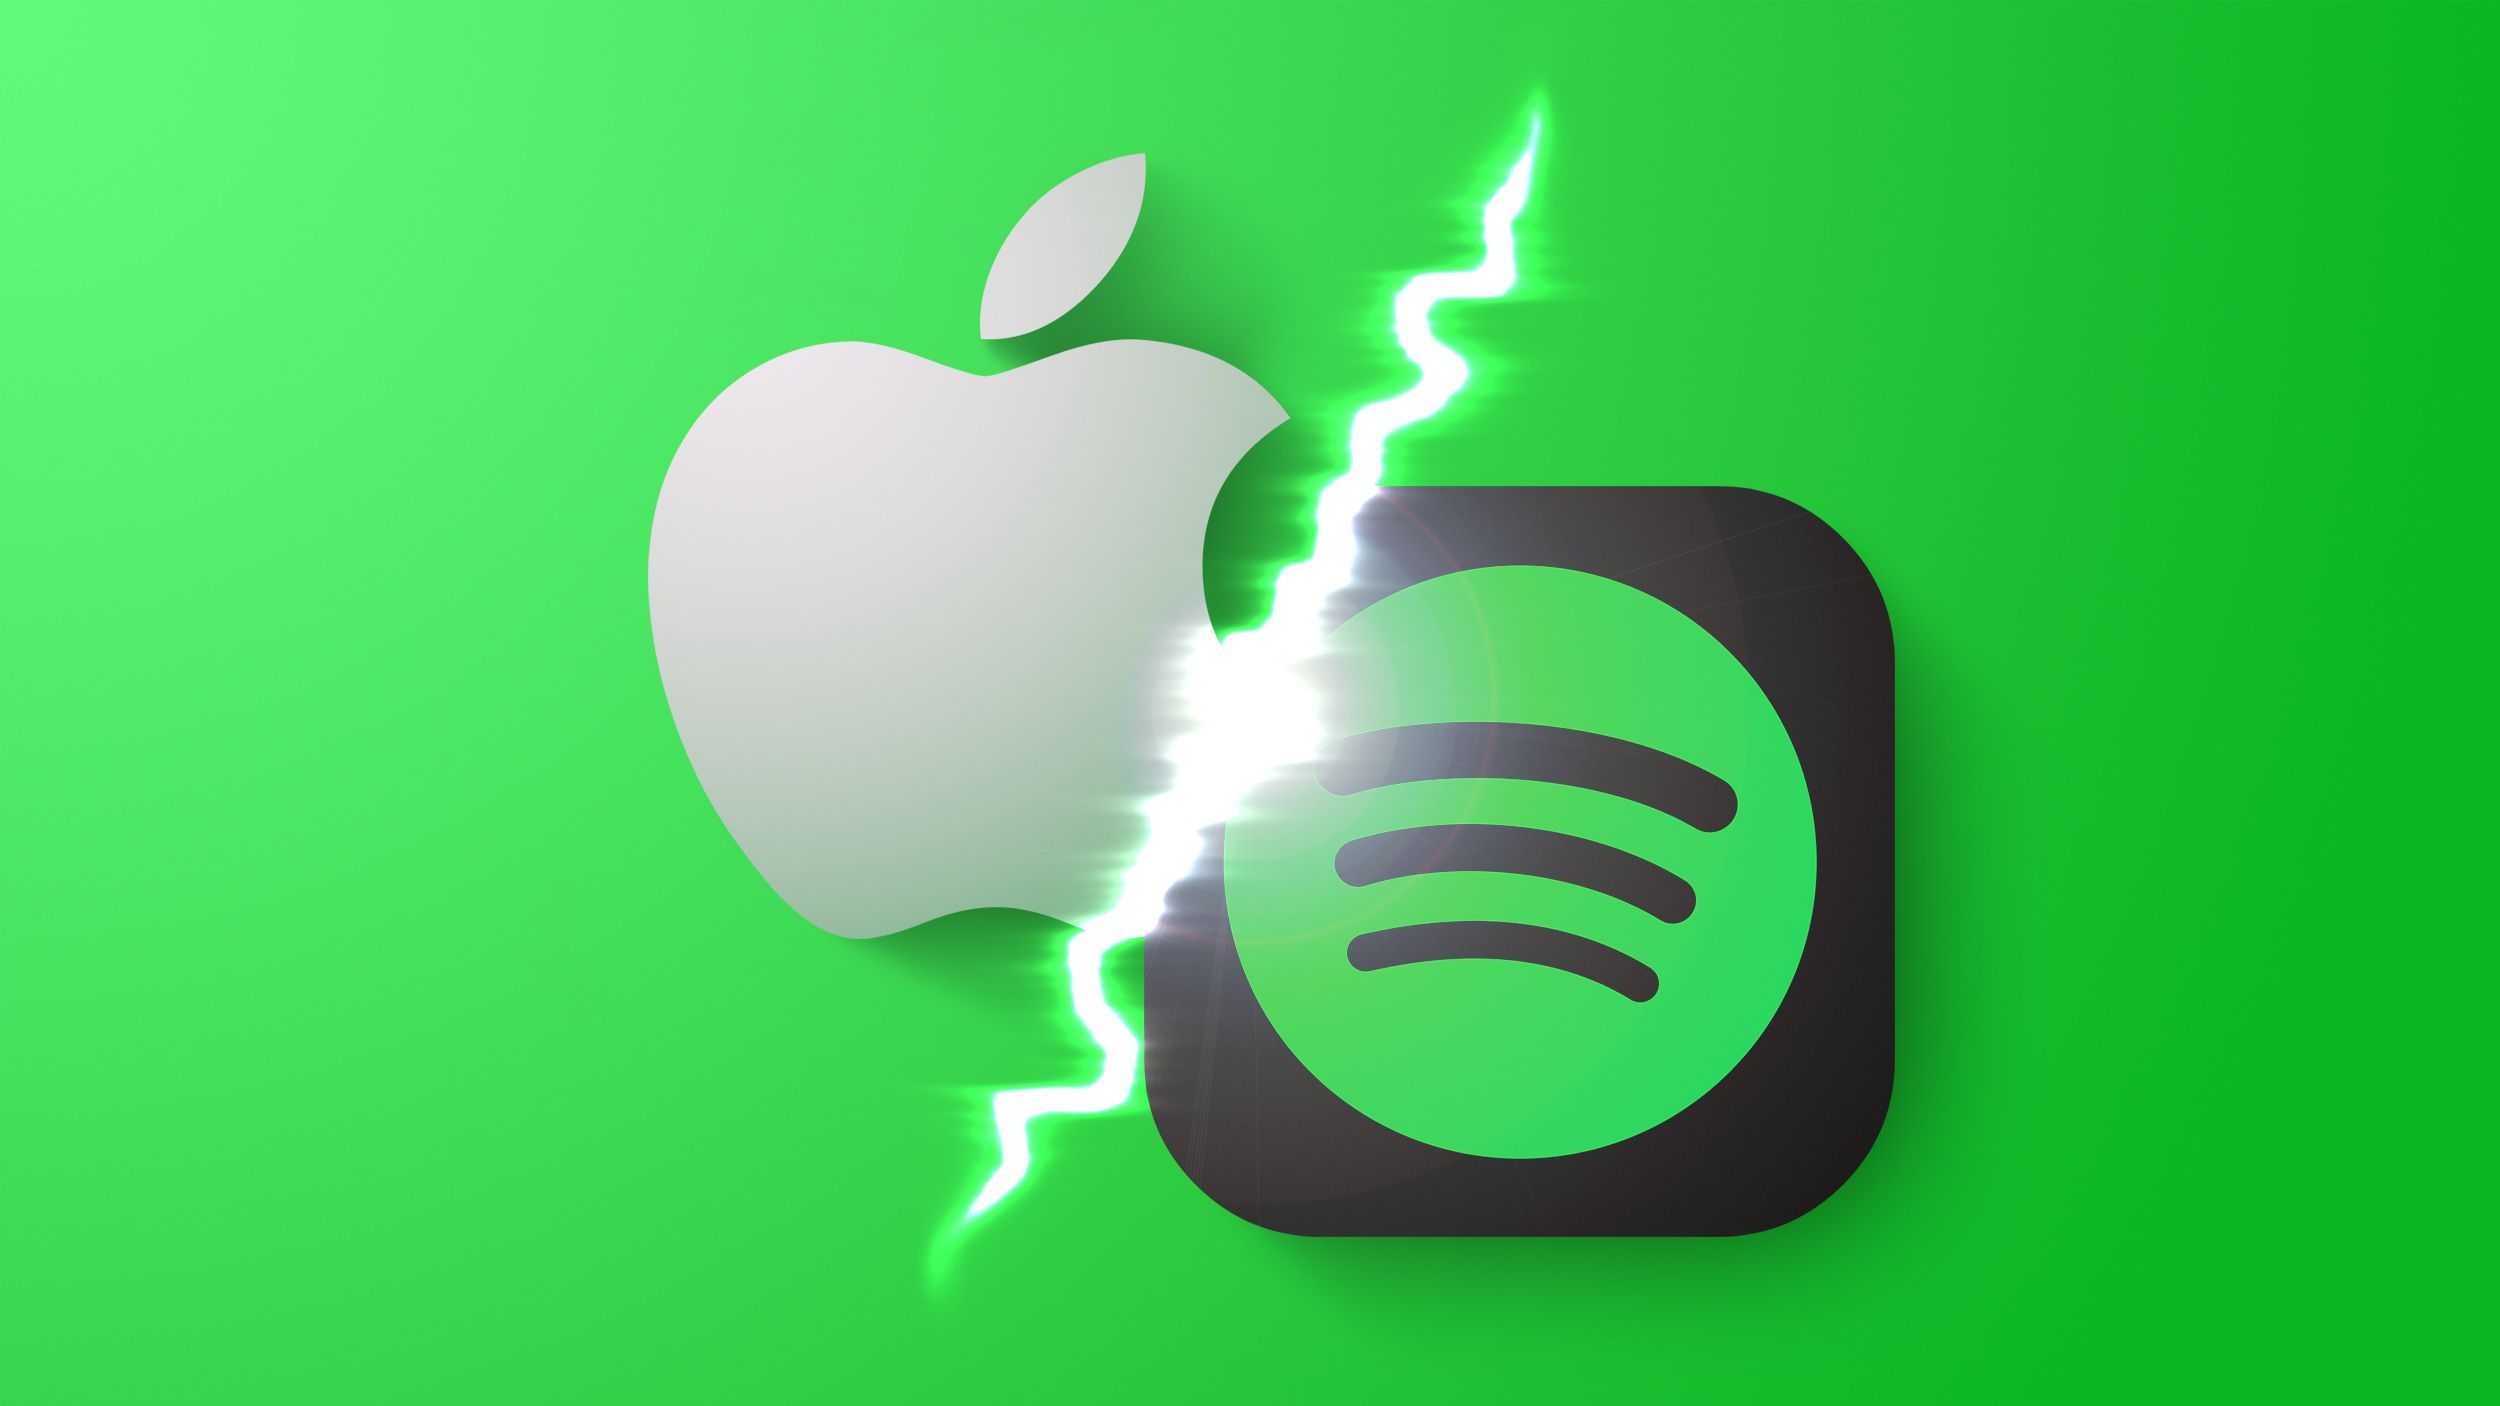 Apple Says Spotify Wants ‘Limitless Access’ to App Store Tools Without Paying